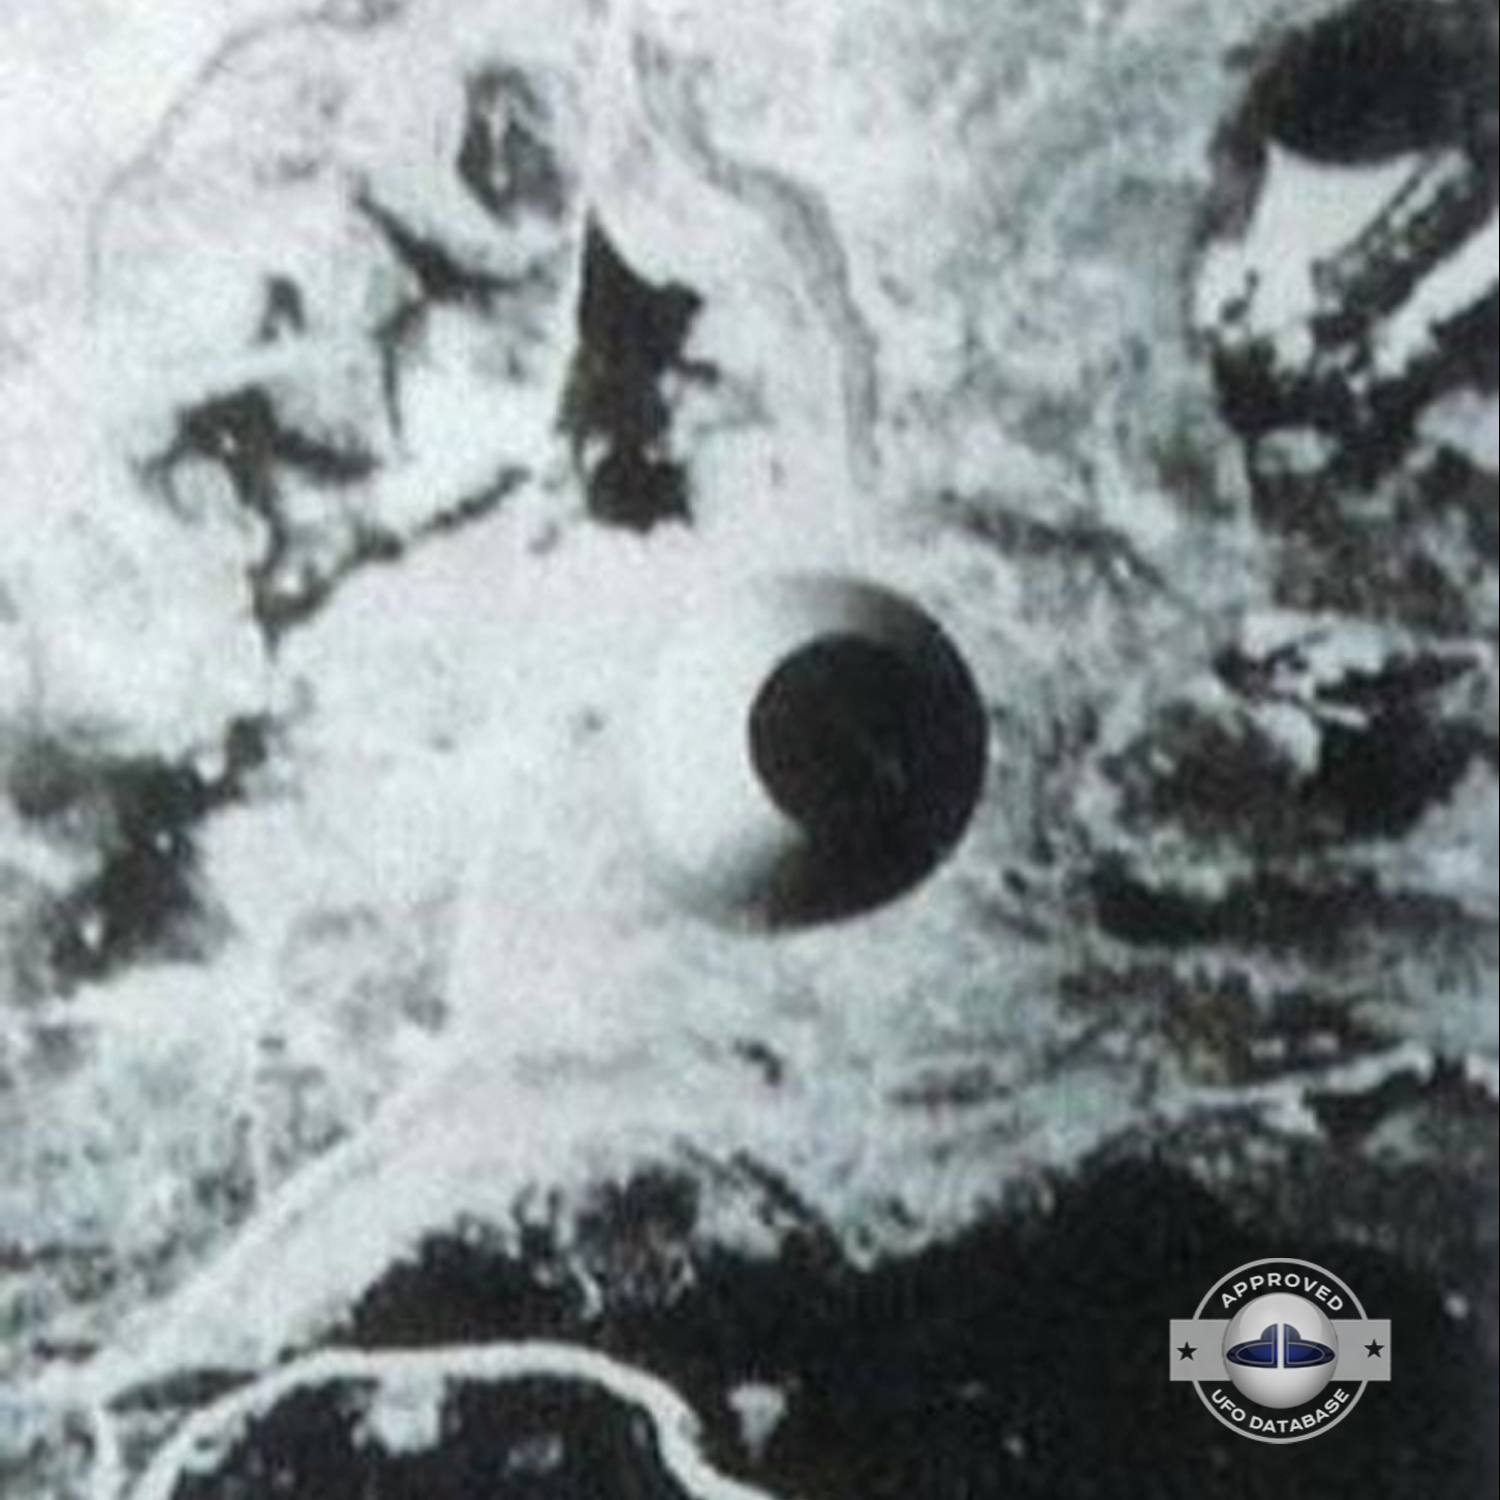 Rare UFO picture considering it was taken from airplane | Venezuela UFO Picture #146-3